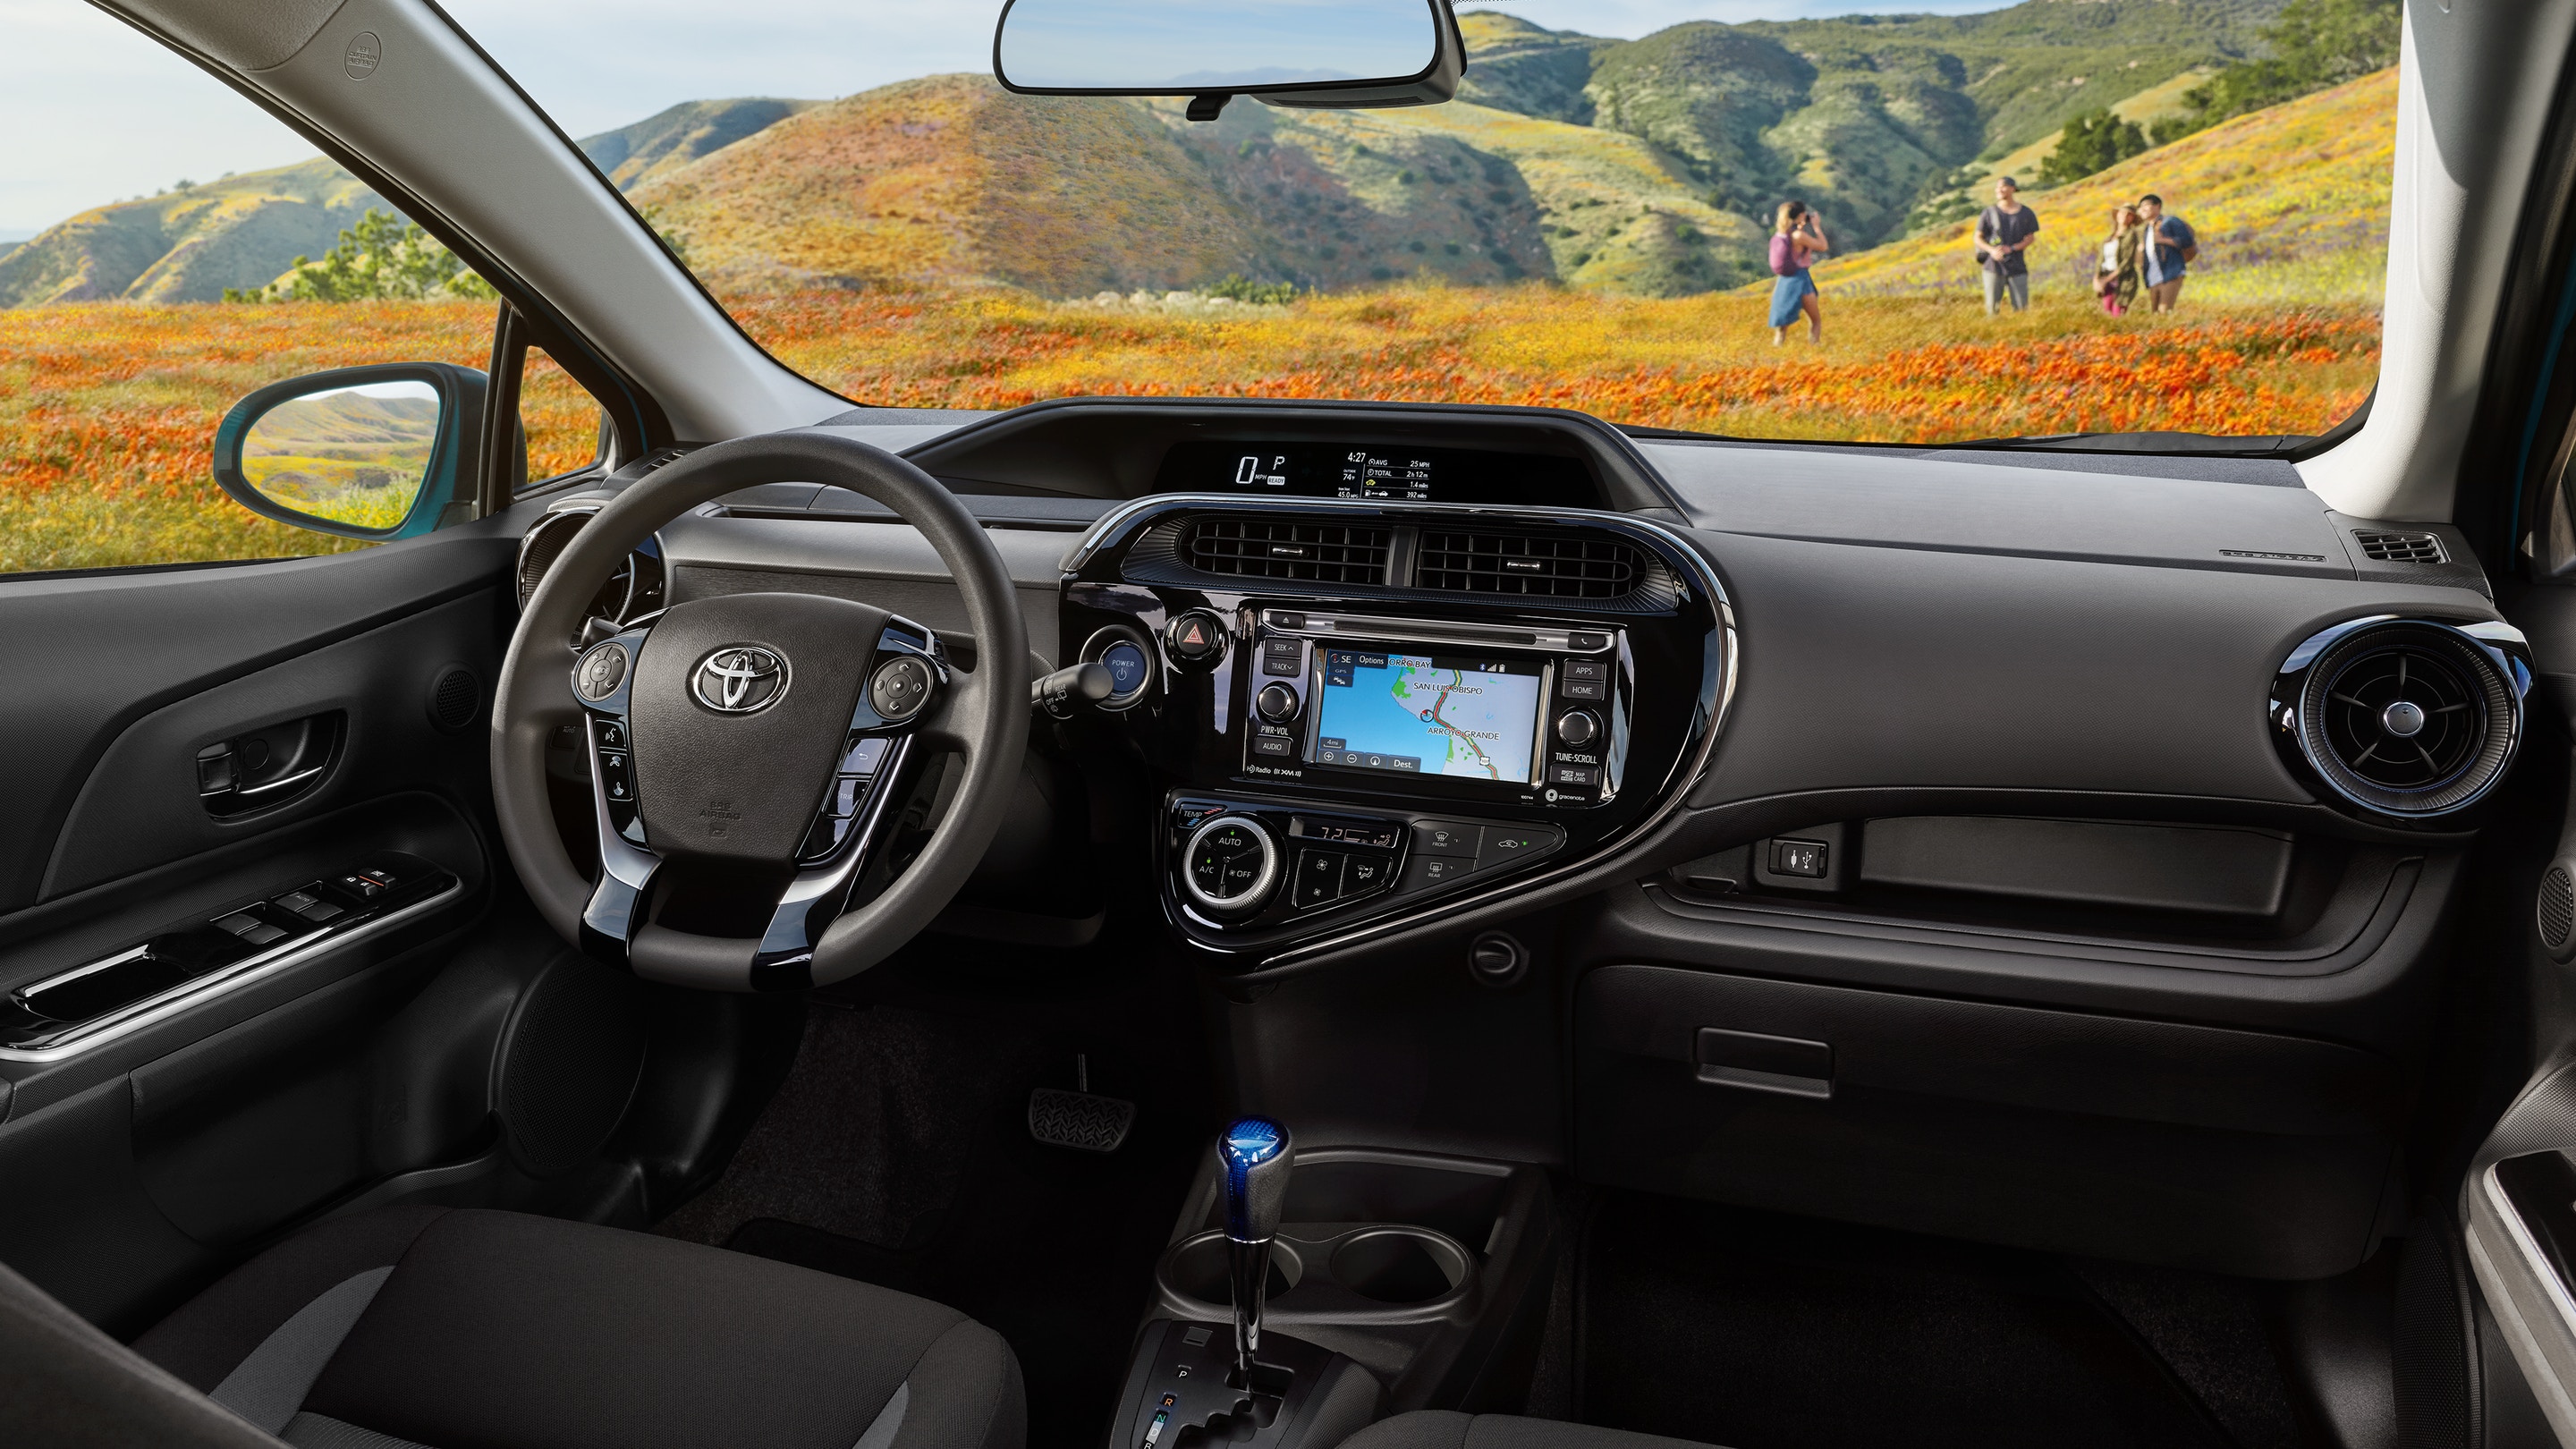 Toyota Prius C Review that needs your attention